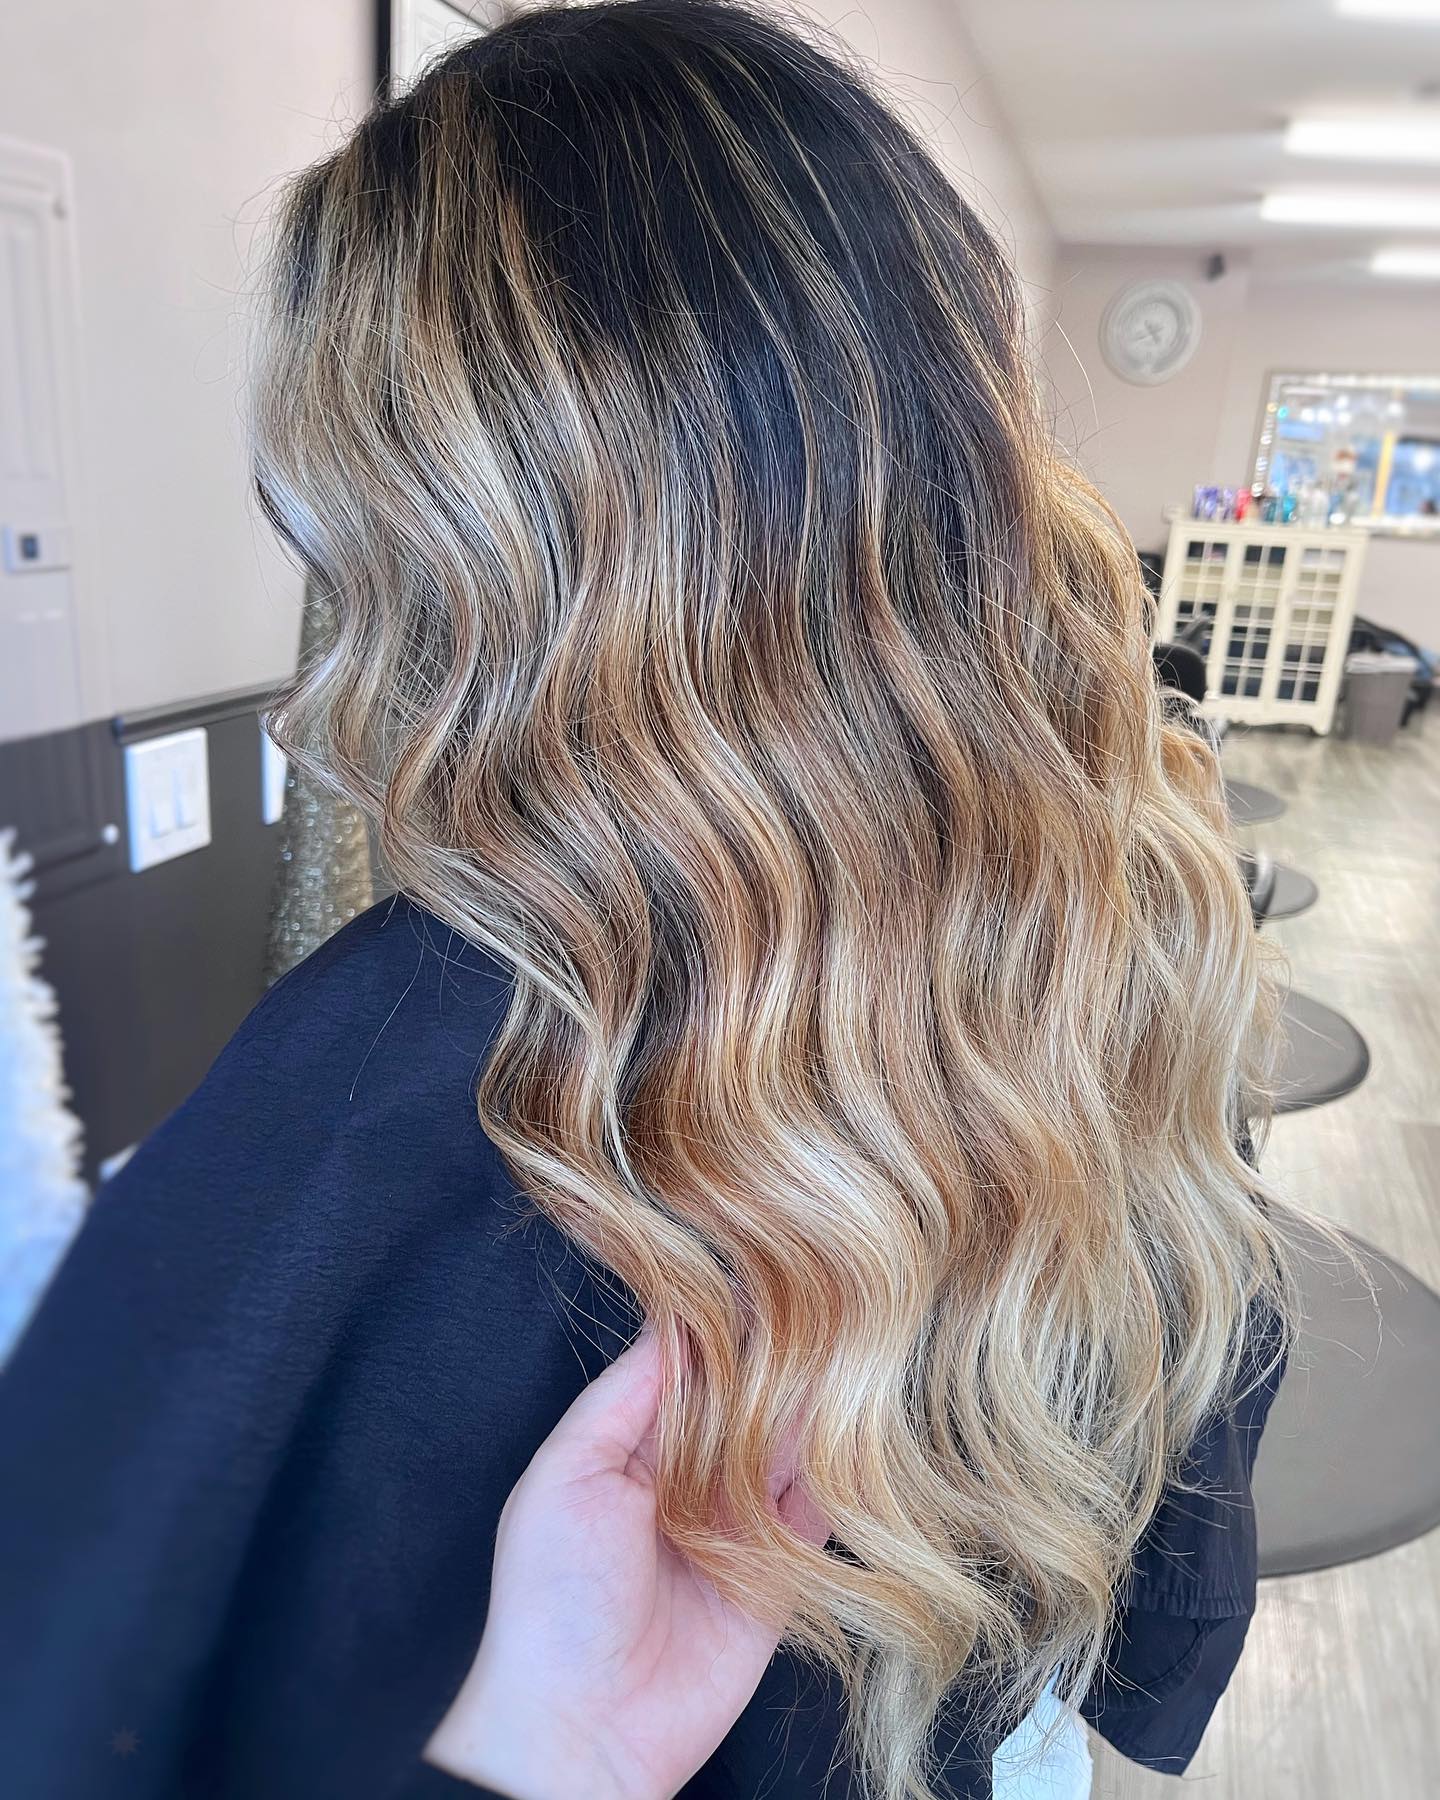 Related Posts: Balayage Trends />